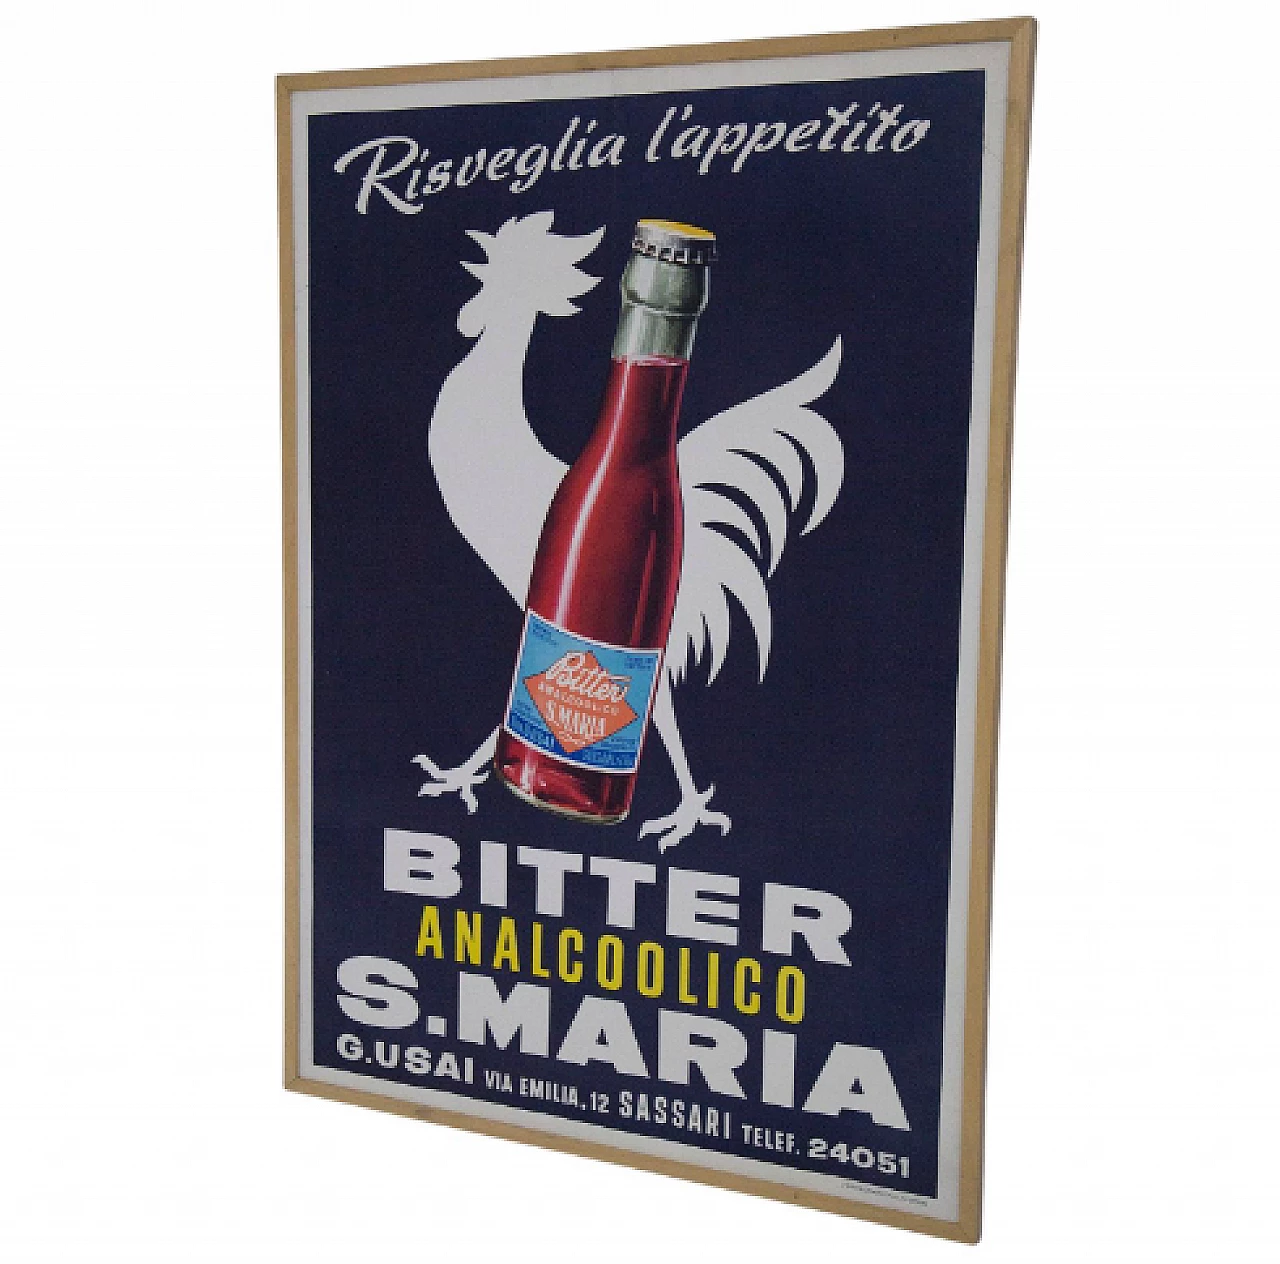 Bitter S. Maria soft drink advertising poster, 1950s 1